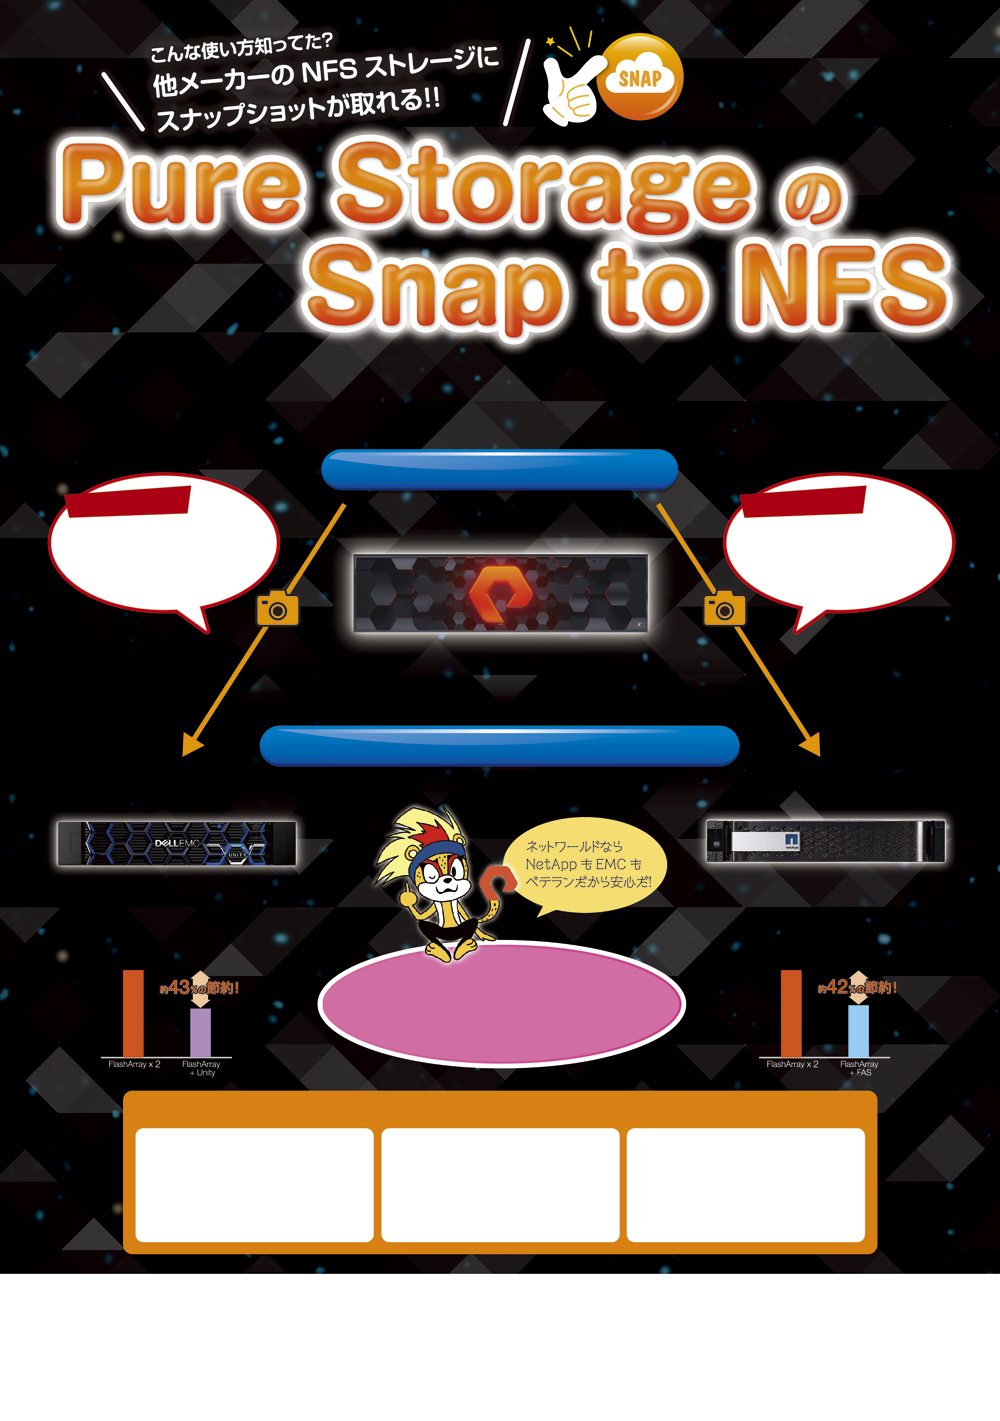 Pure Storage のSnap to NFS